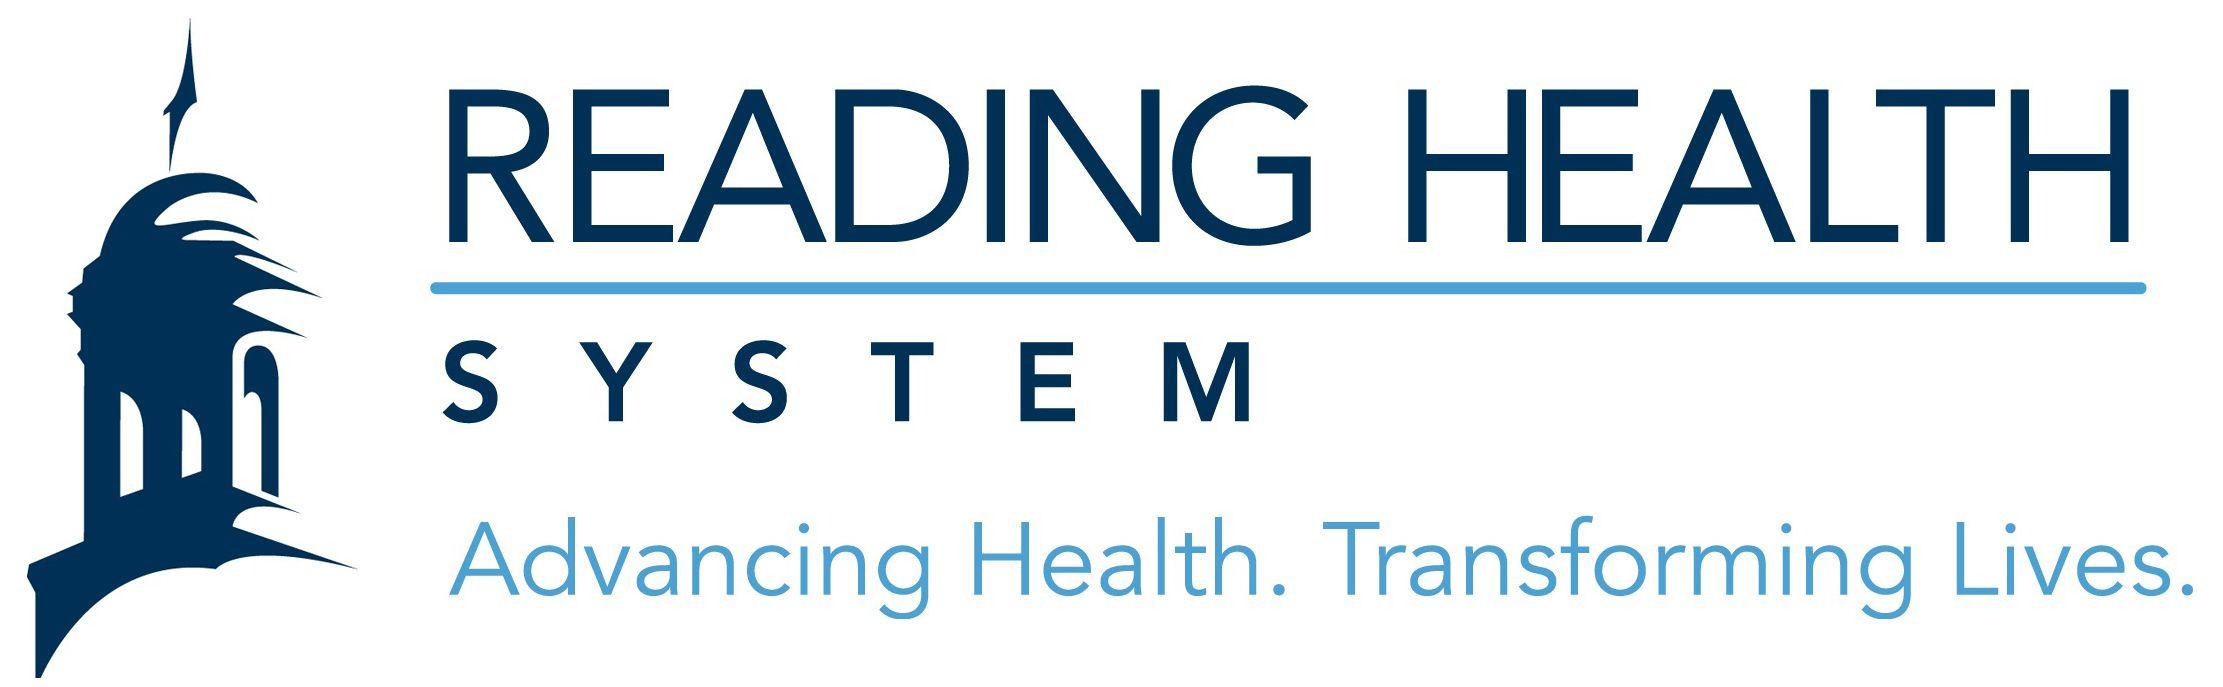 Reading Health System Logo - Coding & Billing Solutions - Quality, Compliance, Accuracy